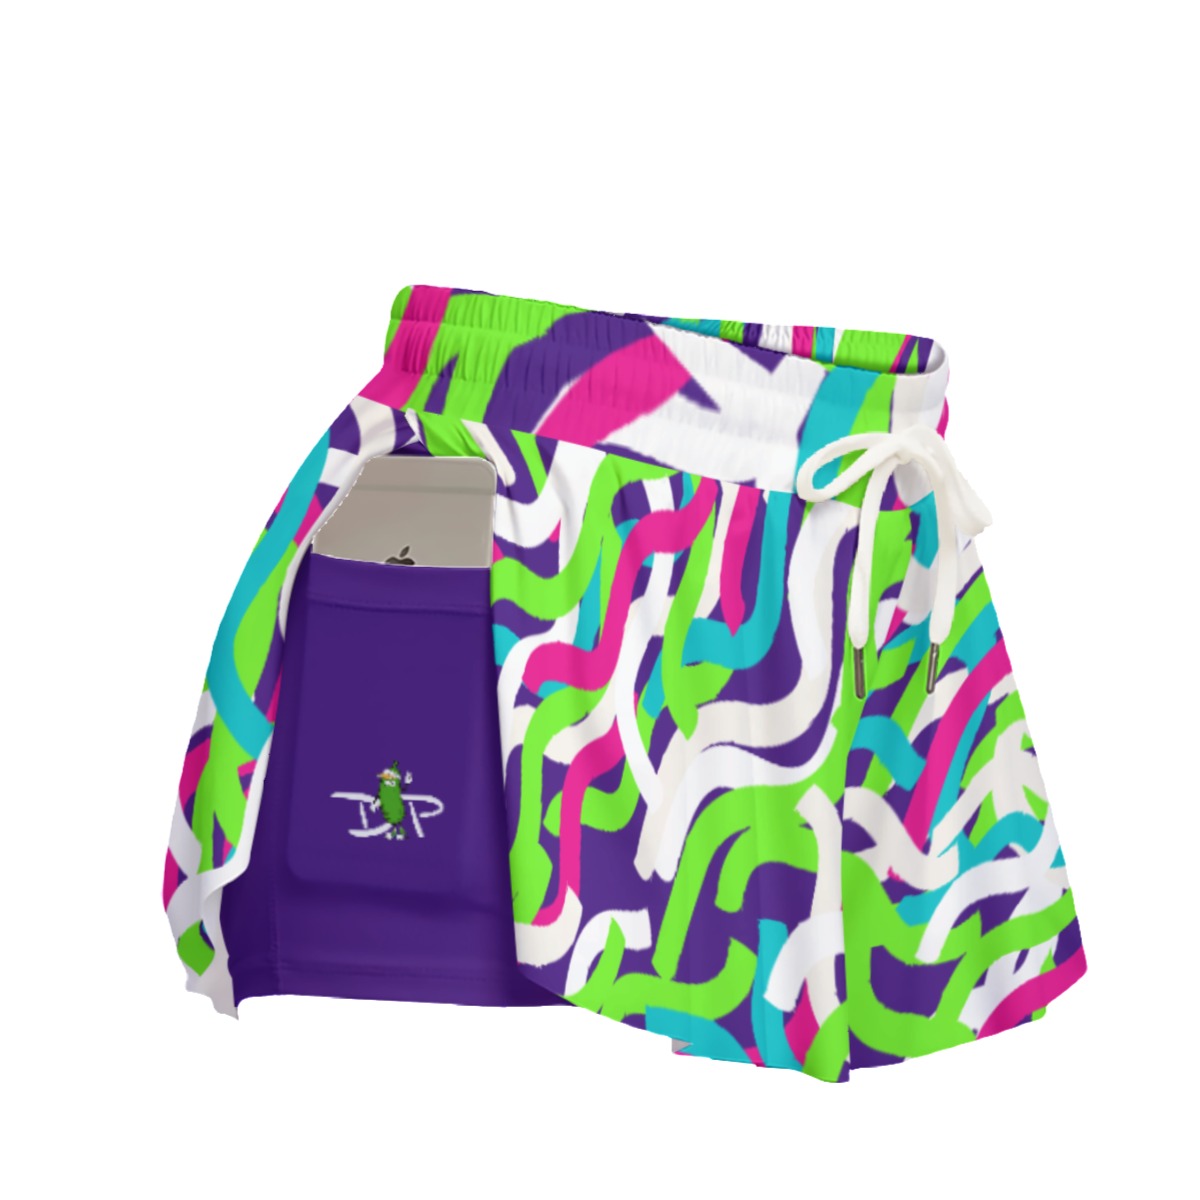 Dizzy Pickle Diana Doodles Pickleball Women's Sport Culottes Skorts with Inner Shorts and Pockets